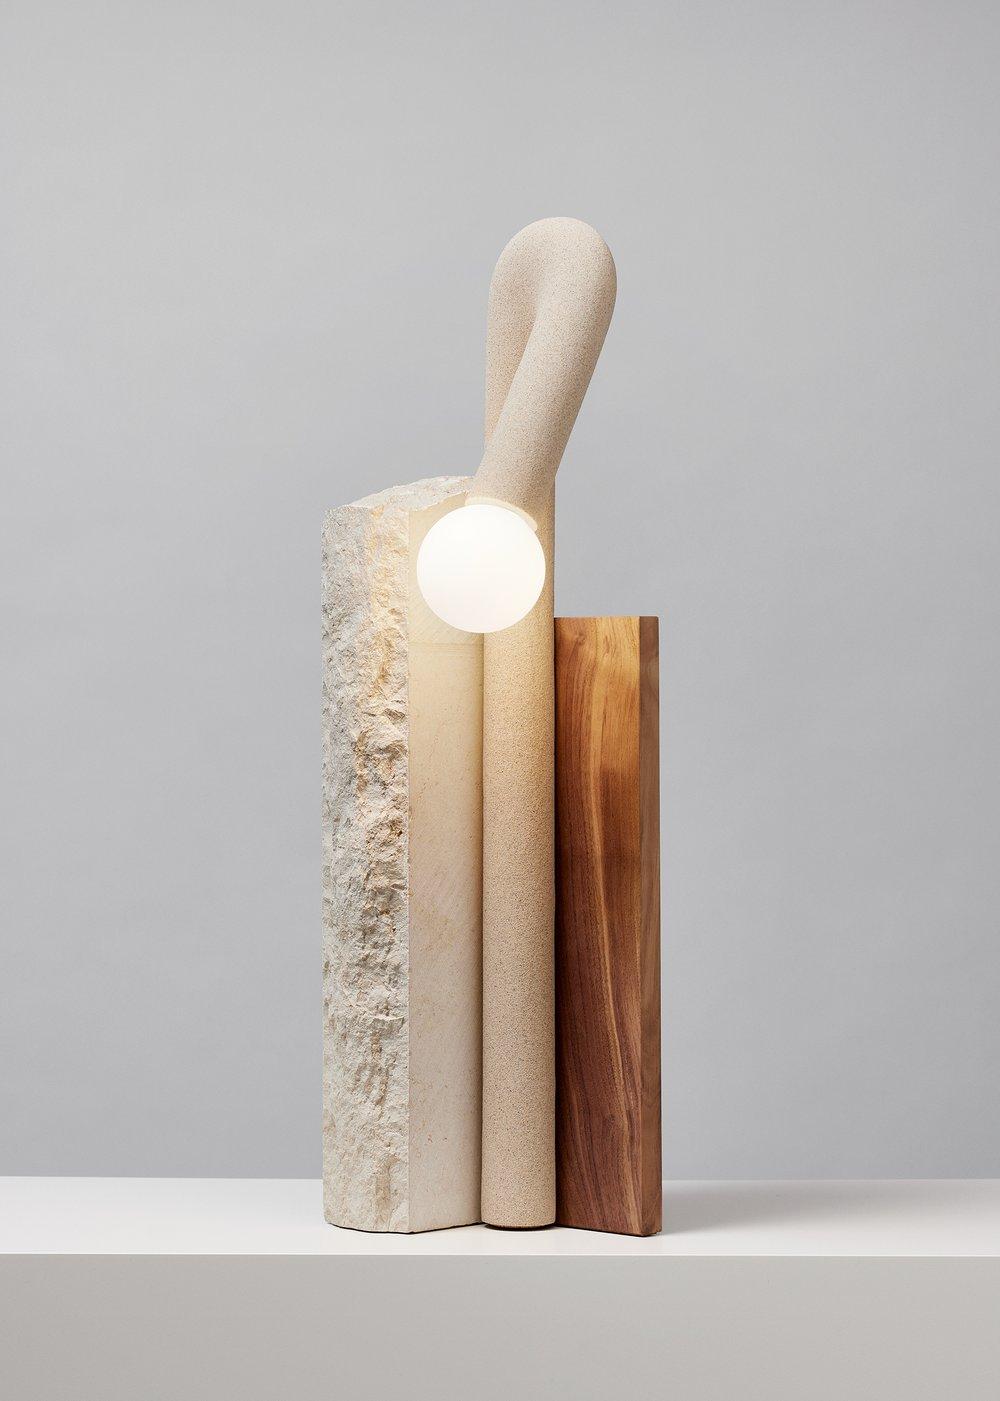 Corner Triangle Table Lamp by Hot Wire Extensions
Exclusive Edition of 1 + 1 AP
Dimensions: D 12 x W 22 x H 75 cm 
Materials: Natural beige sand, waste nylon powder, Jura limestone, walnut.
18 kg

Lively yet strong, the ‘Simulations Series’ takes us